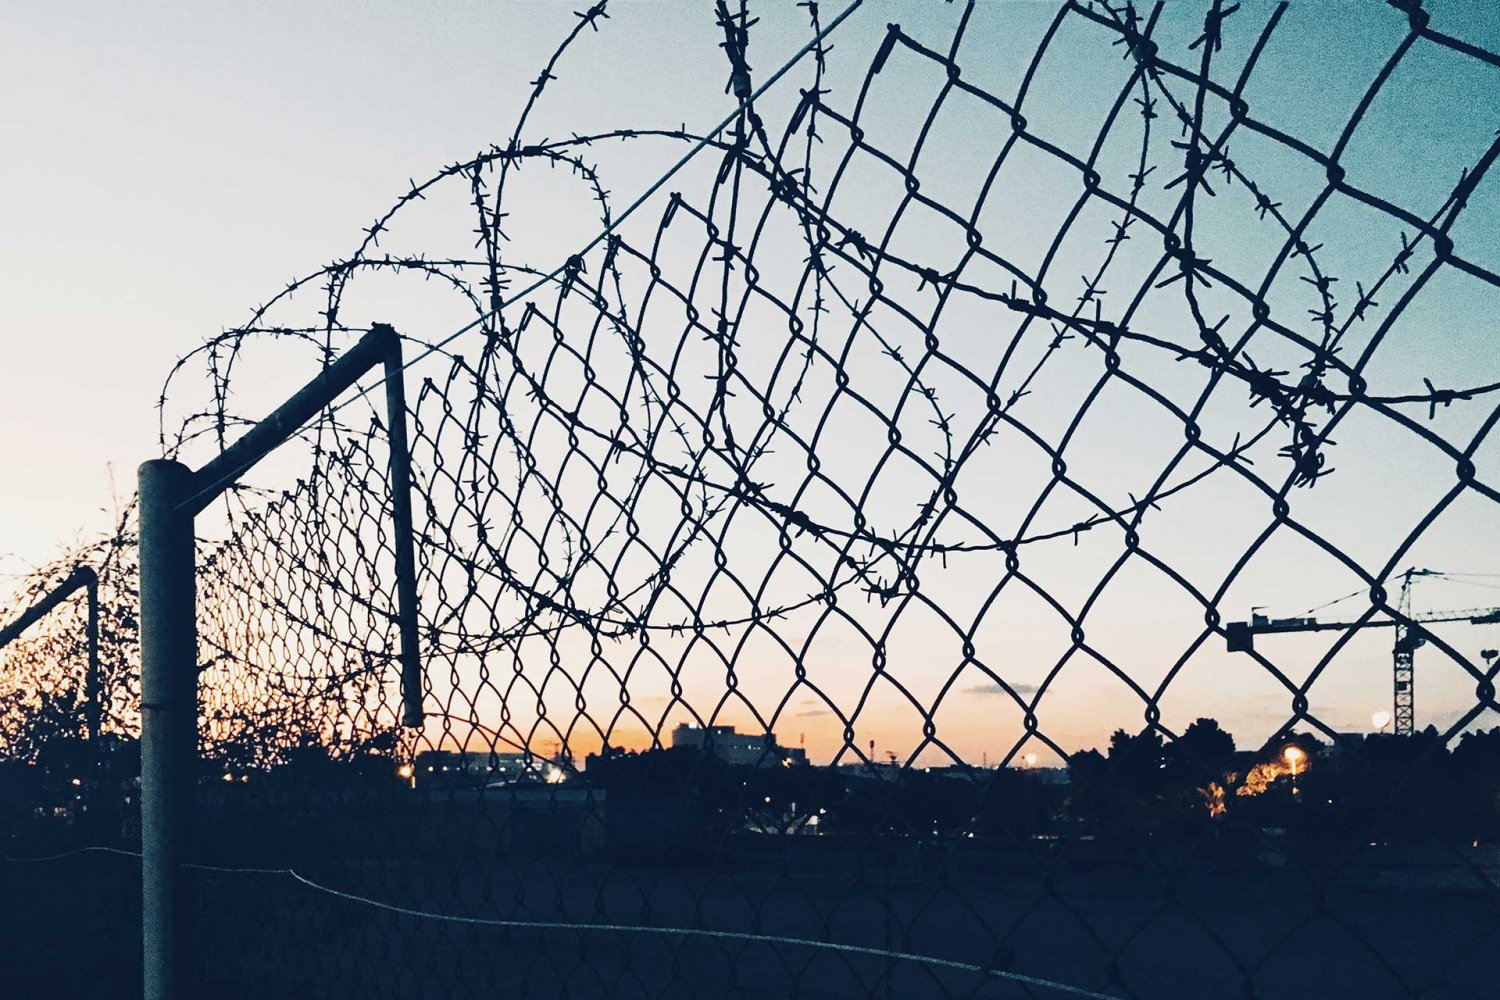 Grid fence with barbed wire, September 27, 2018, in Central District, Israel